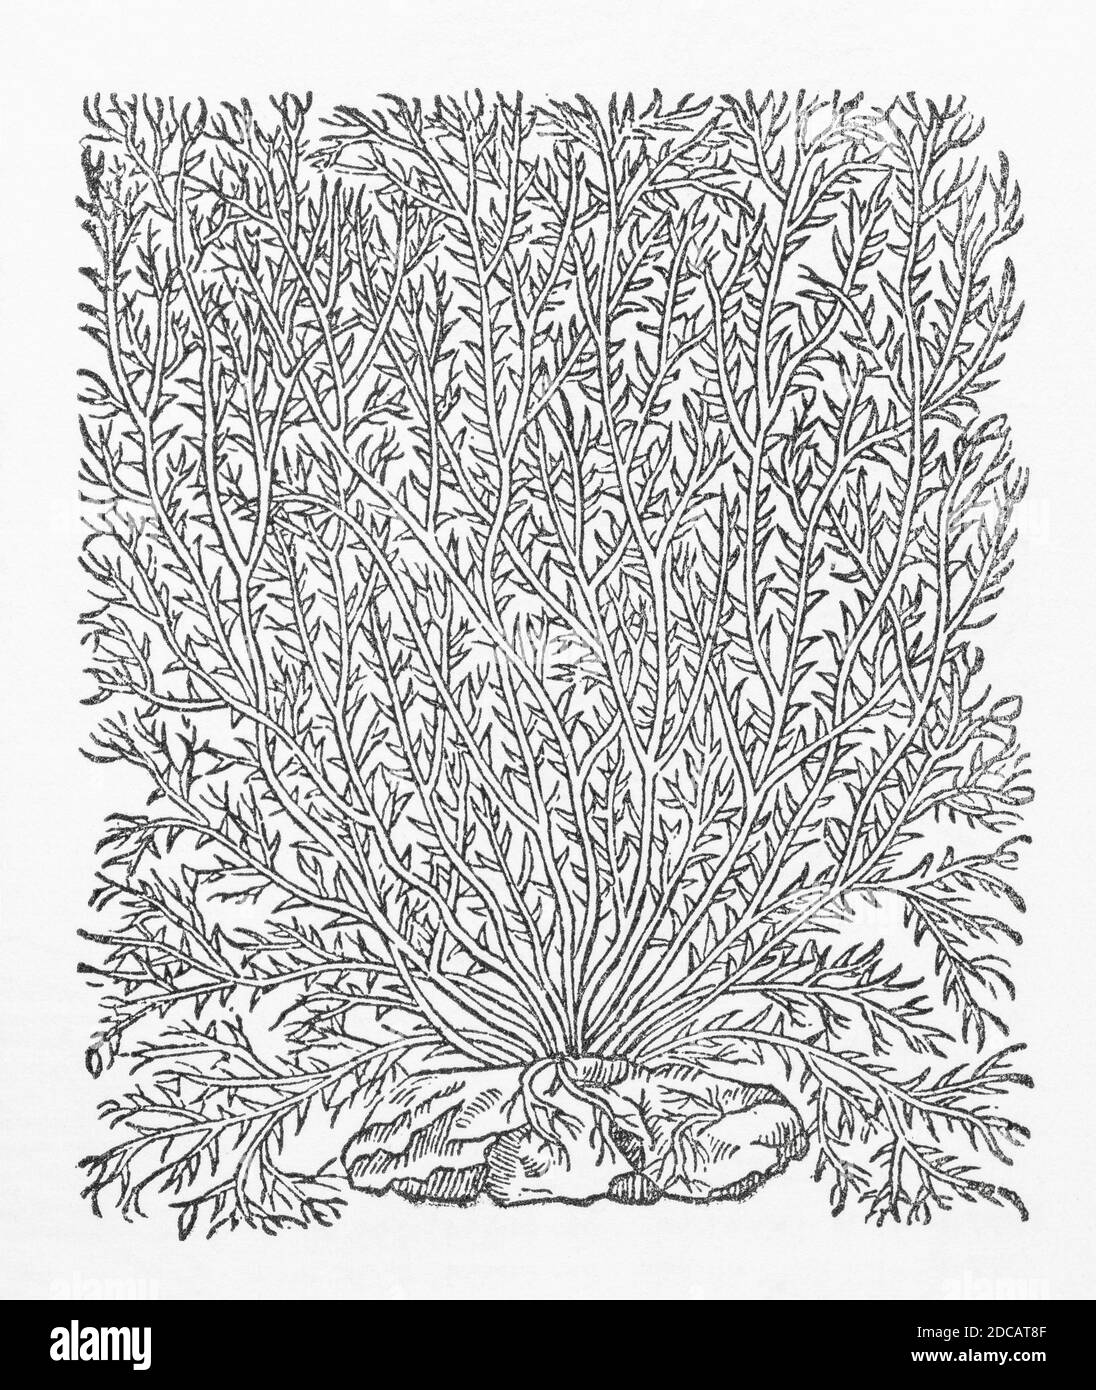 White Coral woodcut from Gerarde's Herball, History of Plants. Refers to it as Muscus marinus or Sea Moss, Corallina alba. P1379 Stock Photo